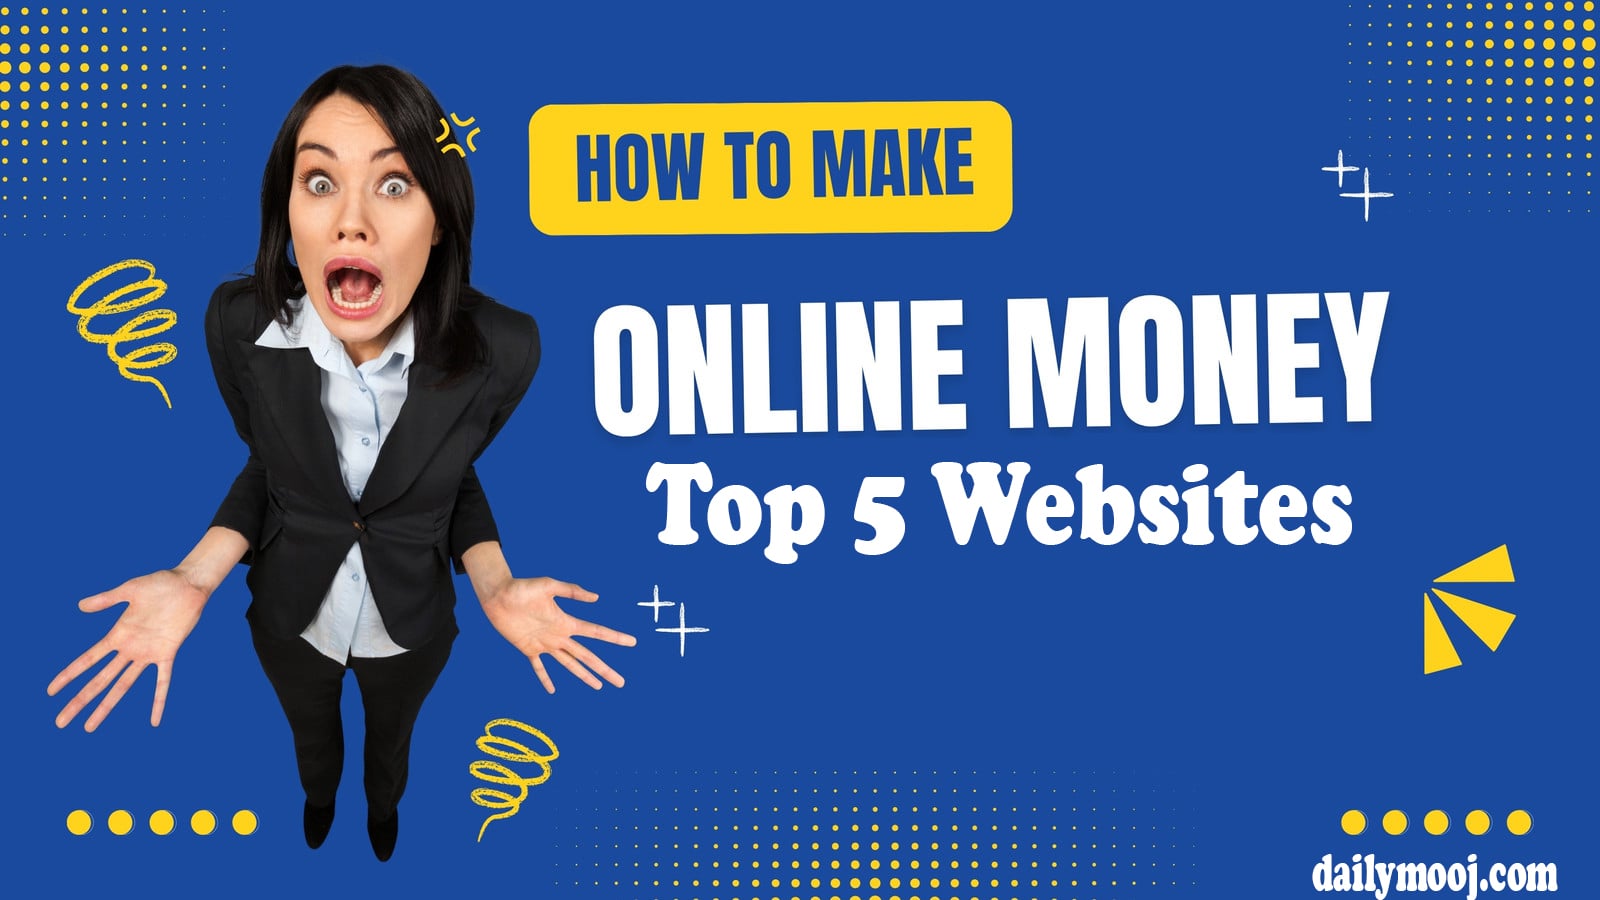 Top 5 Websites to Make Money Online Without Investing